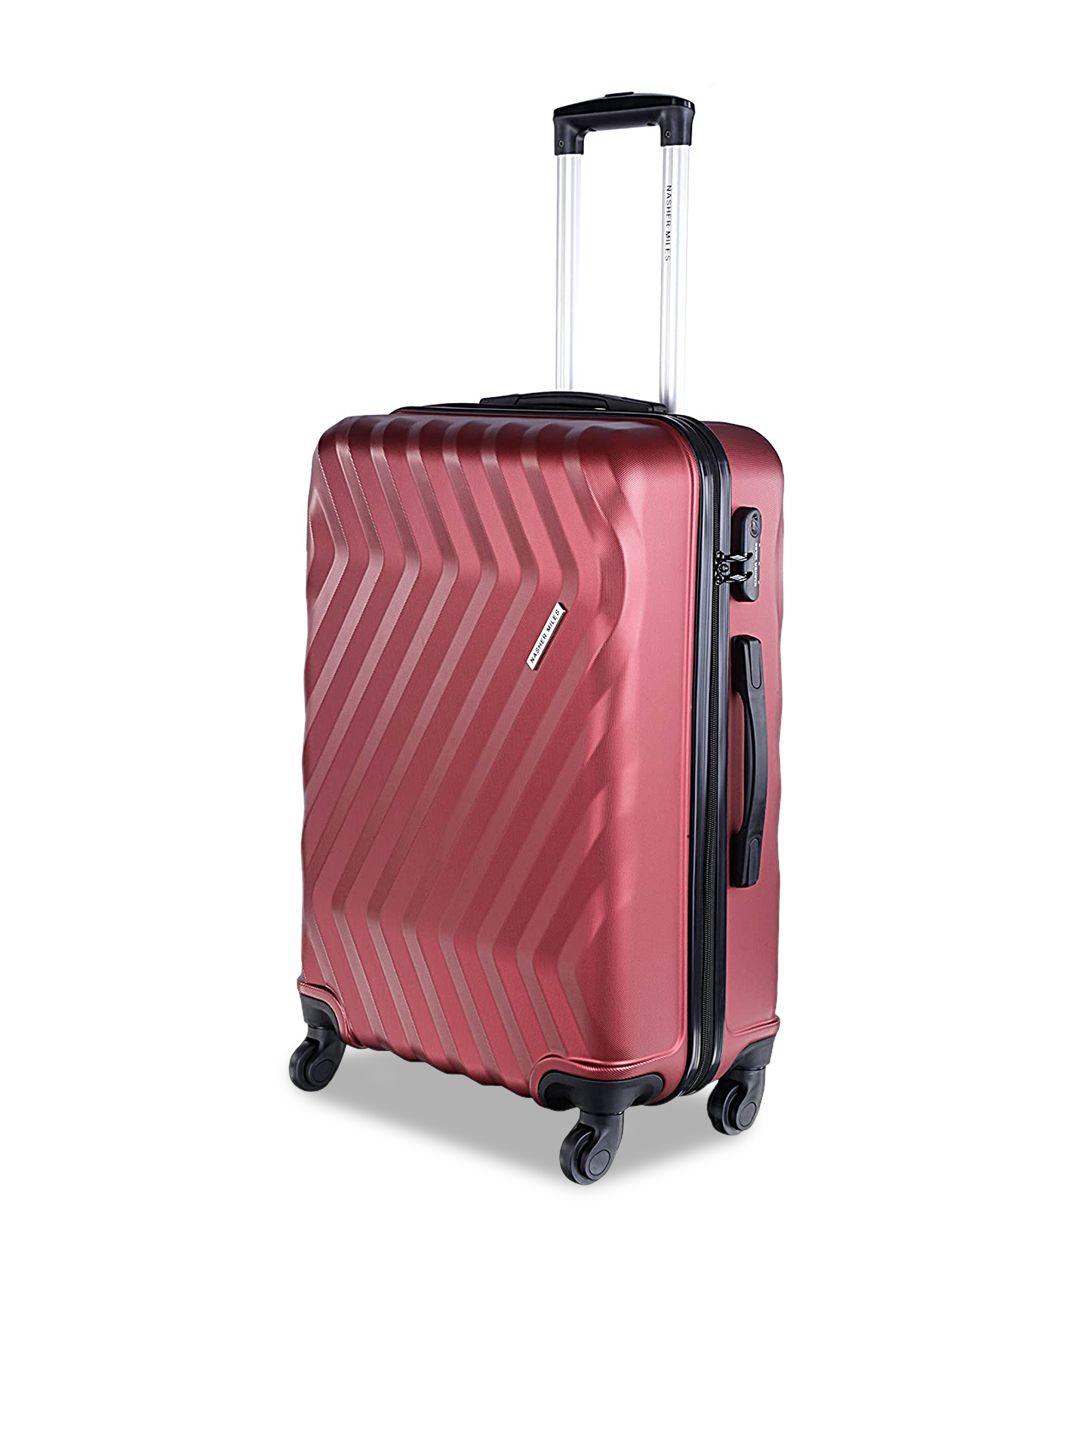 nasher miles lombard hard-side cabin trolley suitcase